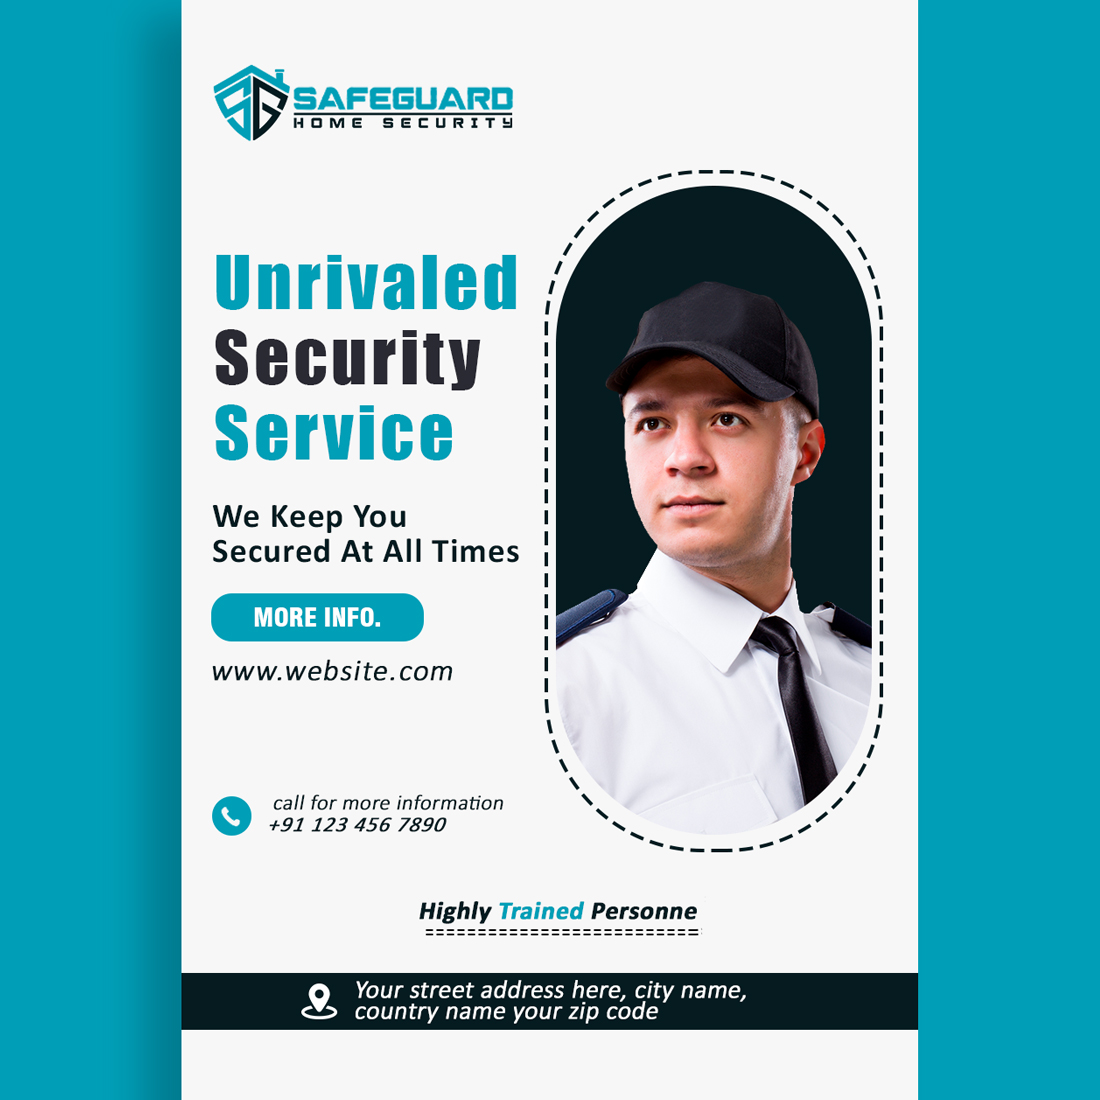 security service banner2.0 447